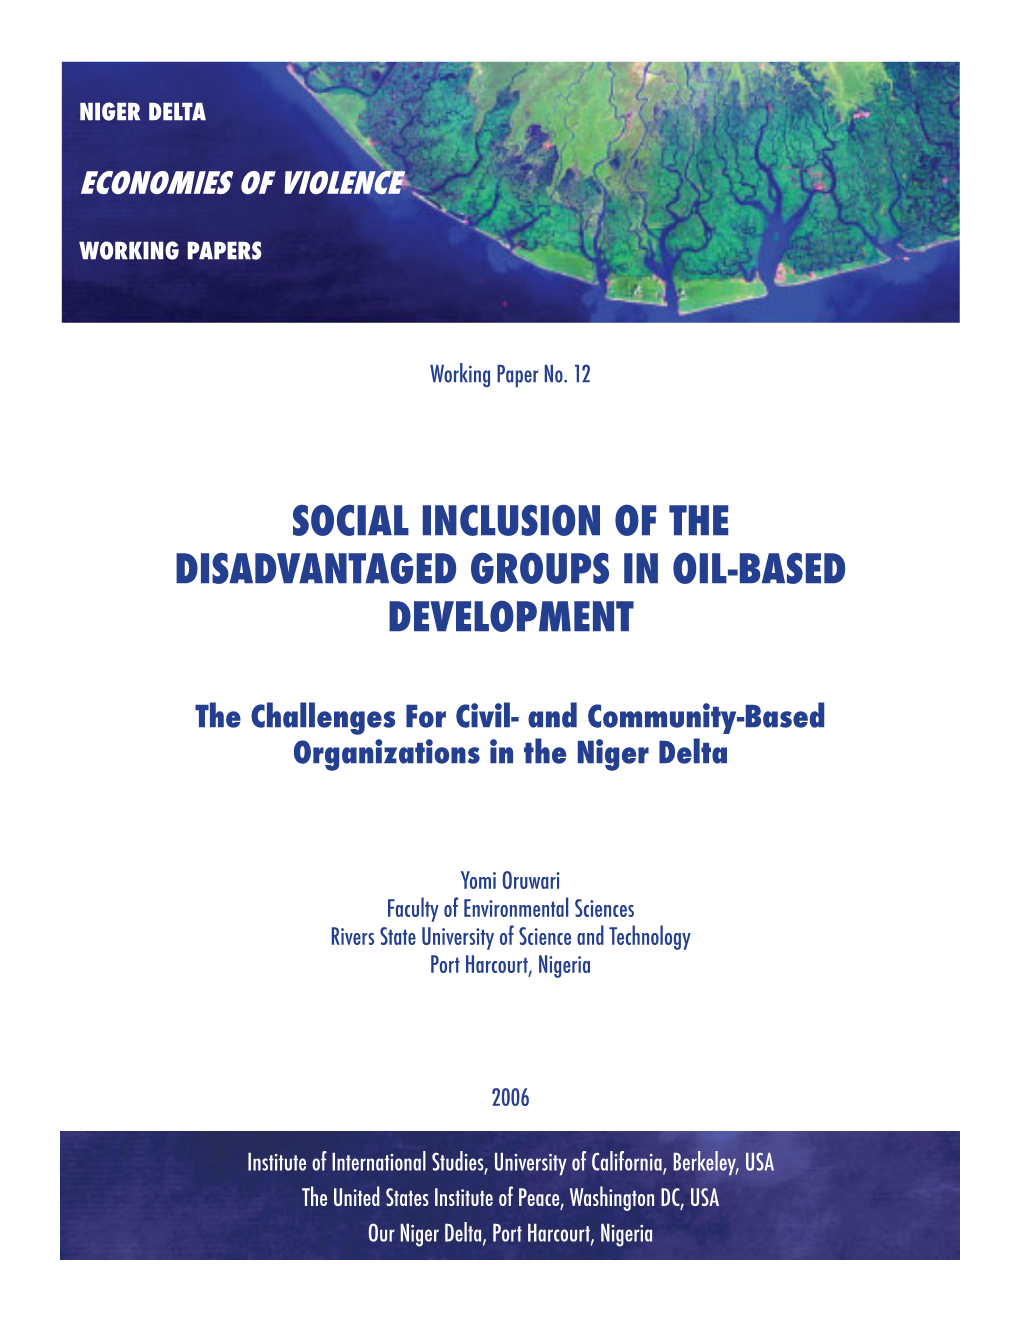 Social Inclusion of the Disadvantaged Groups in Oil-Based Development